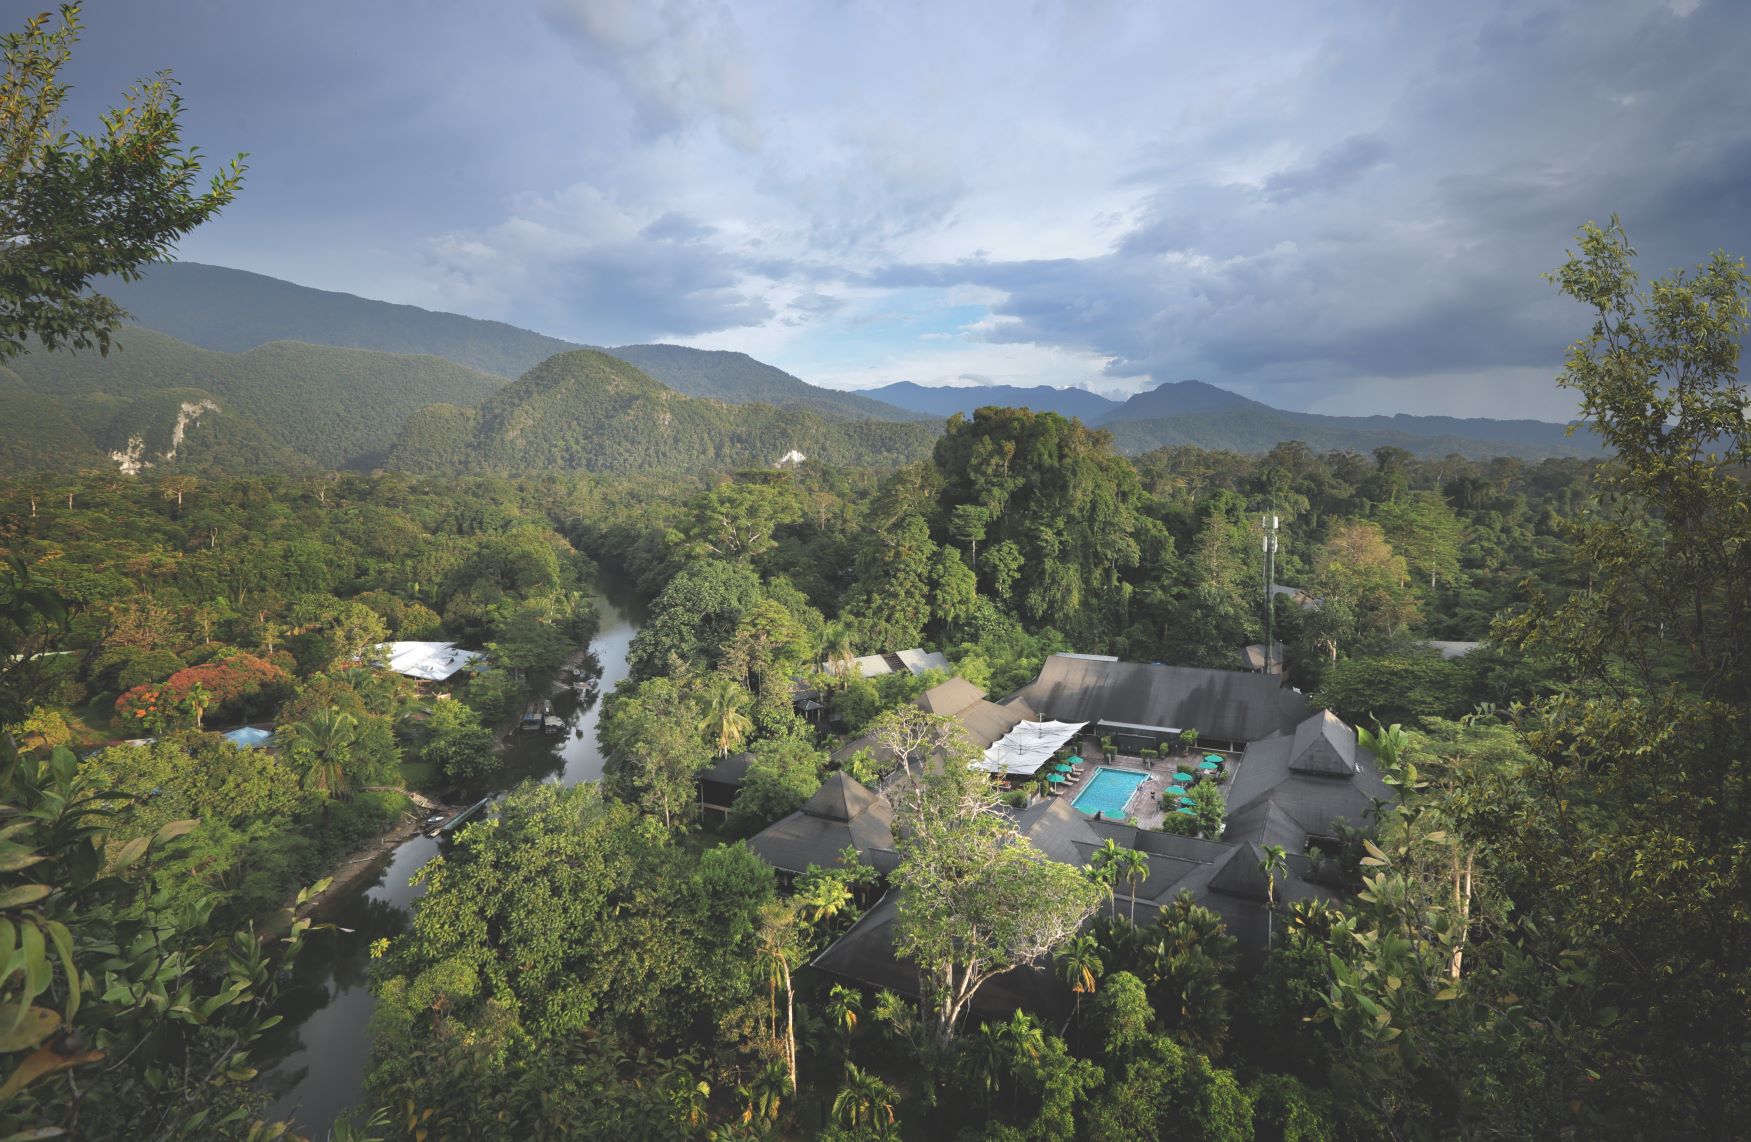 The Ayus Wellness program is located in the Mulu Marriott Resort and Spa in the rainforest of Borneo and directly adjacent to Mulu National Park.